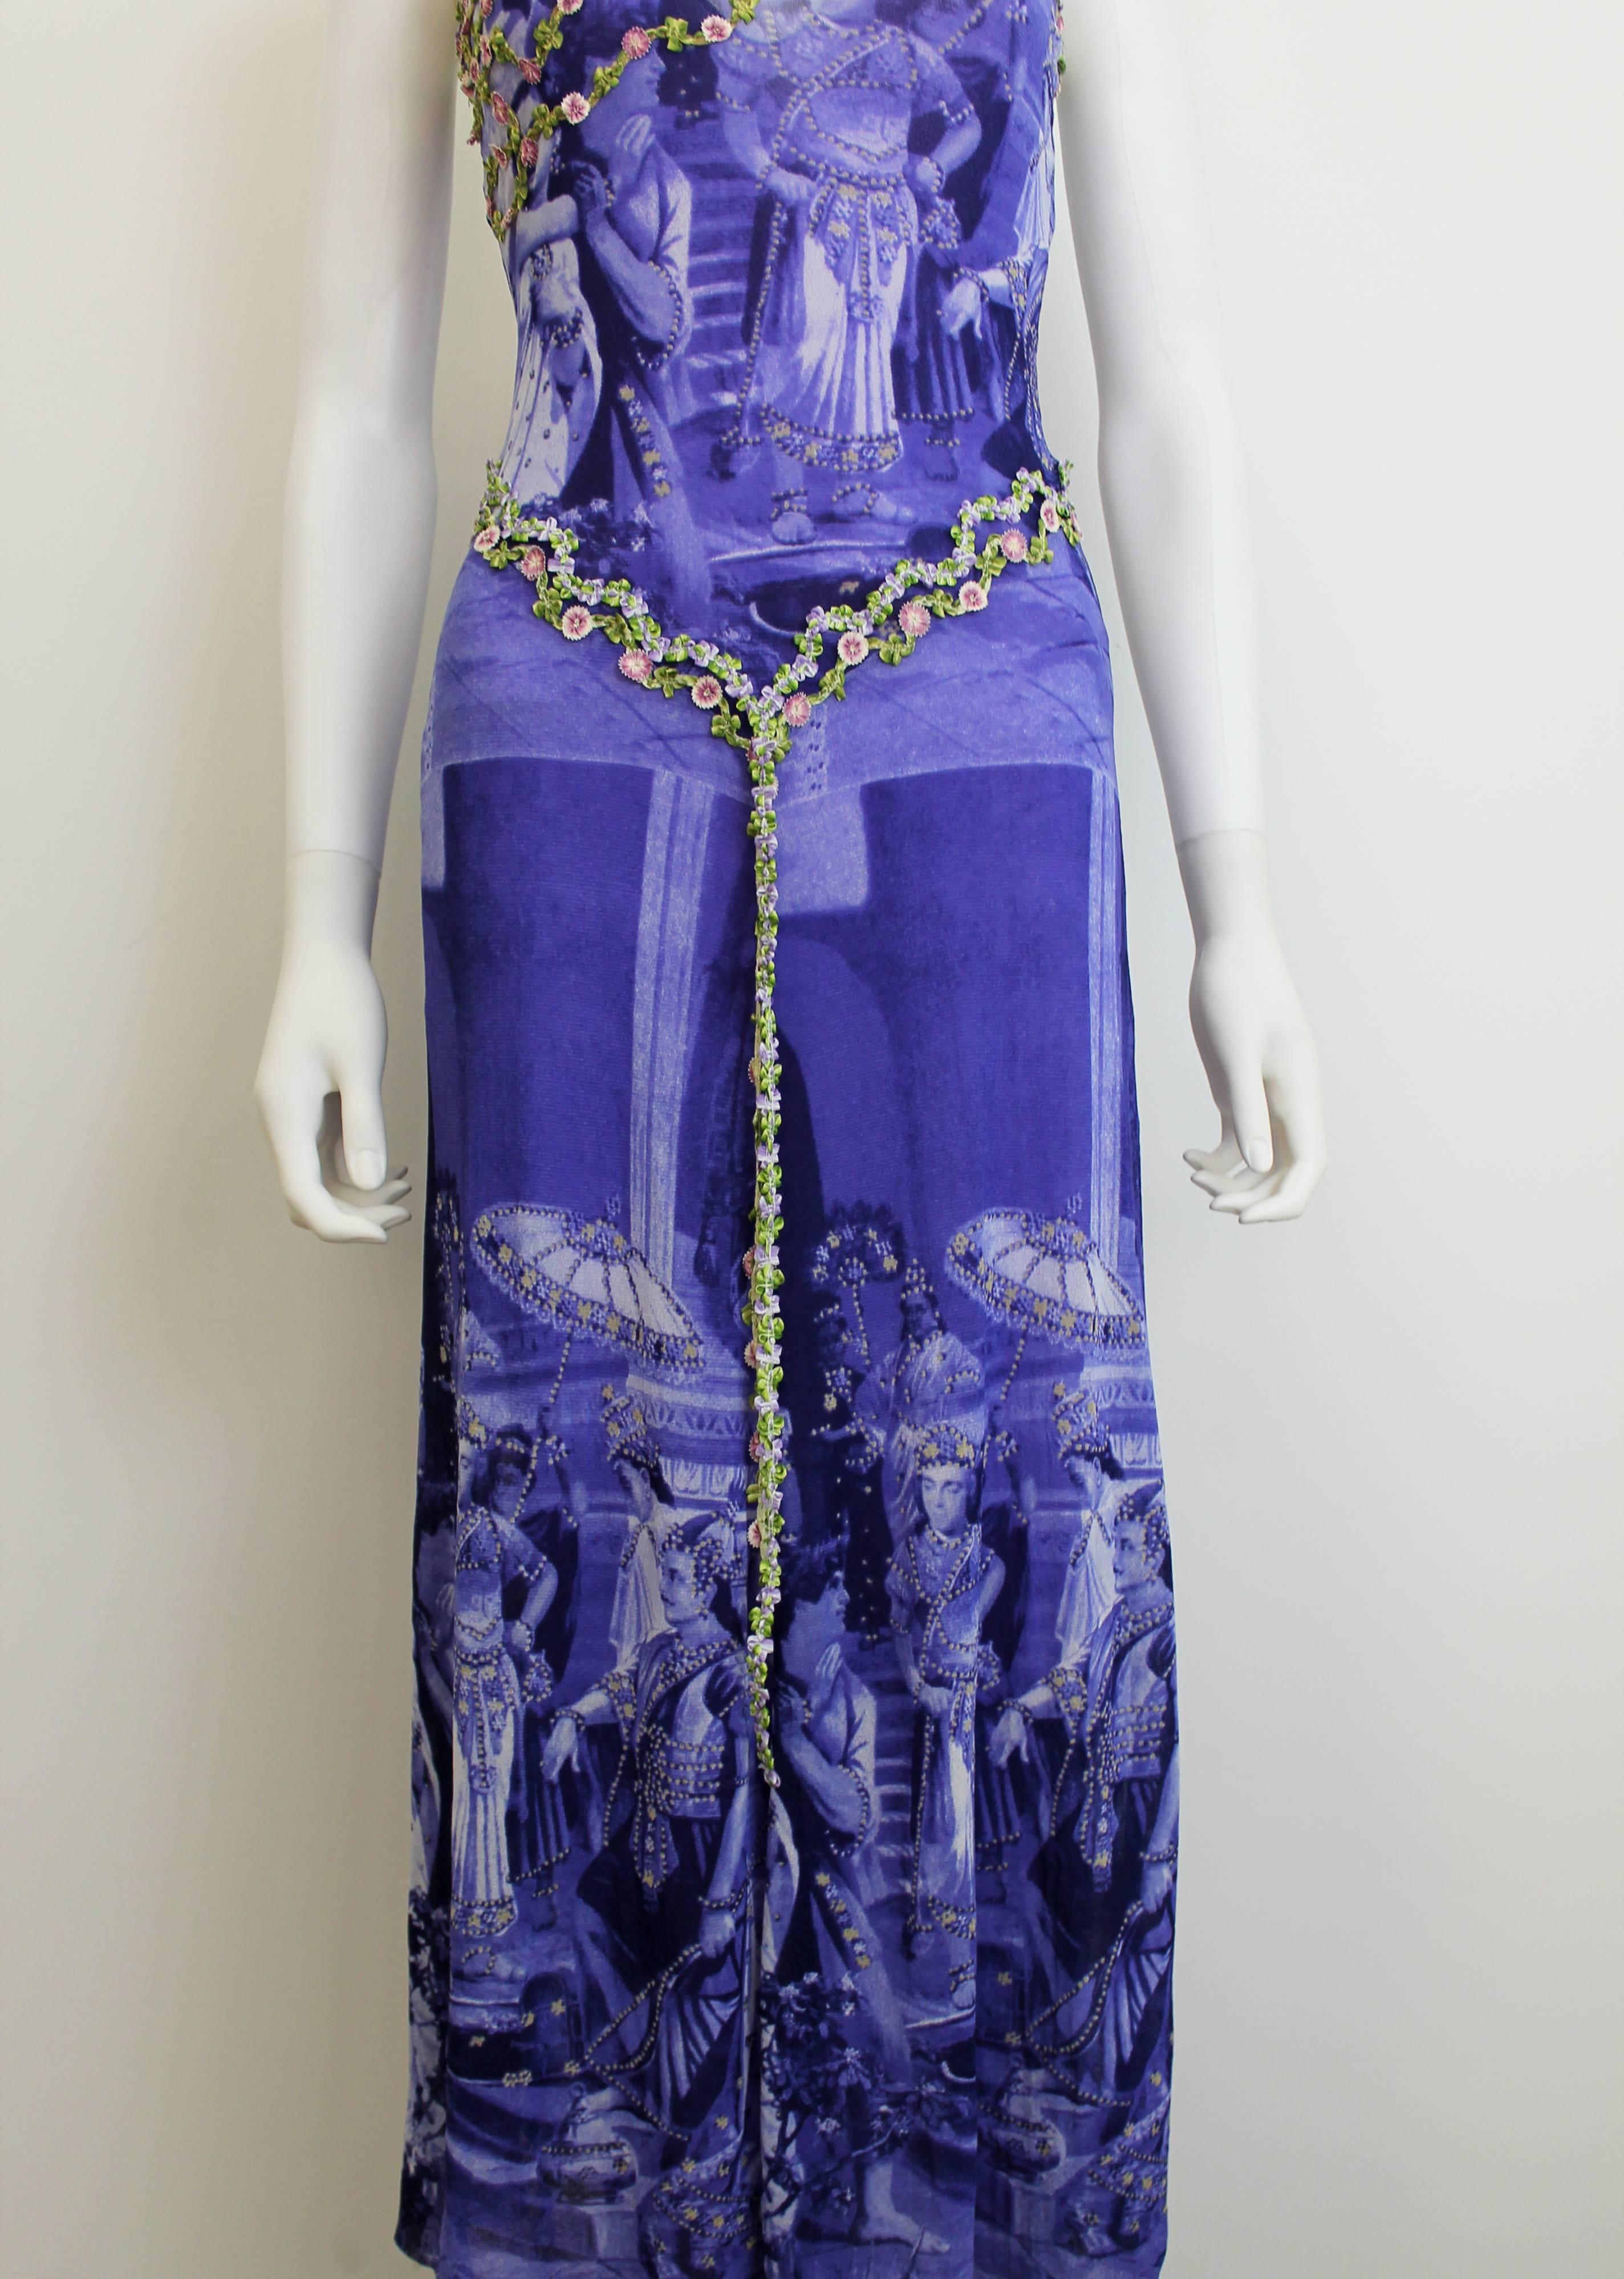 Jean Paul Gaultier purple dress from the mid-1990's. Features flower belt and neckline. Comes with a separate purple slip (also Jean Paul Gaultier, though not the original slip that initially came with the dress).